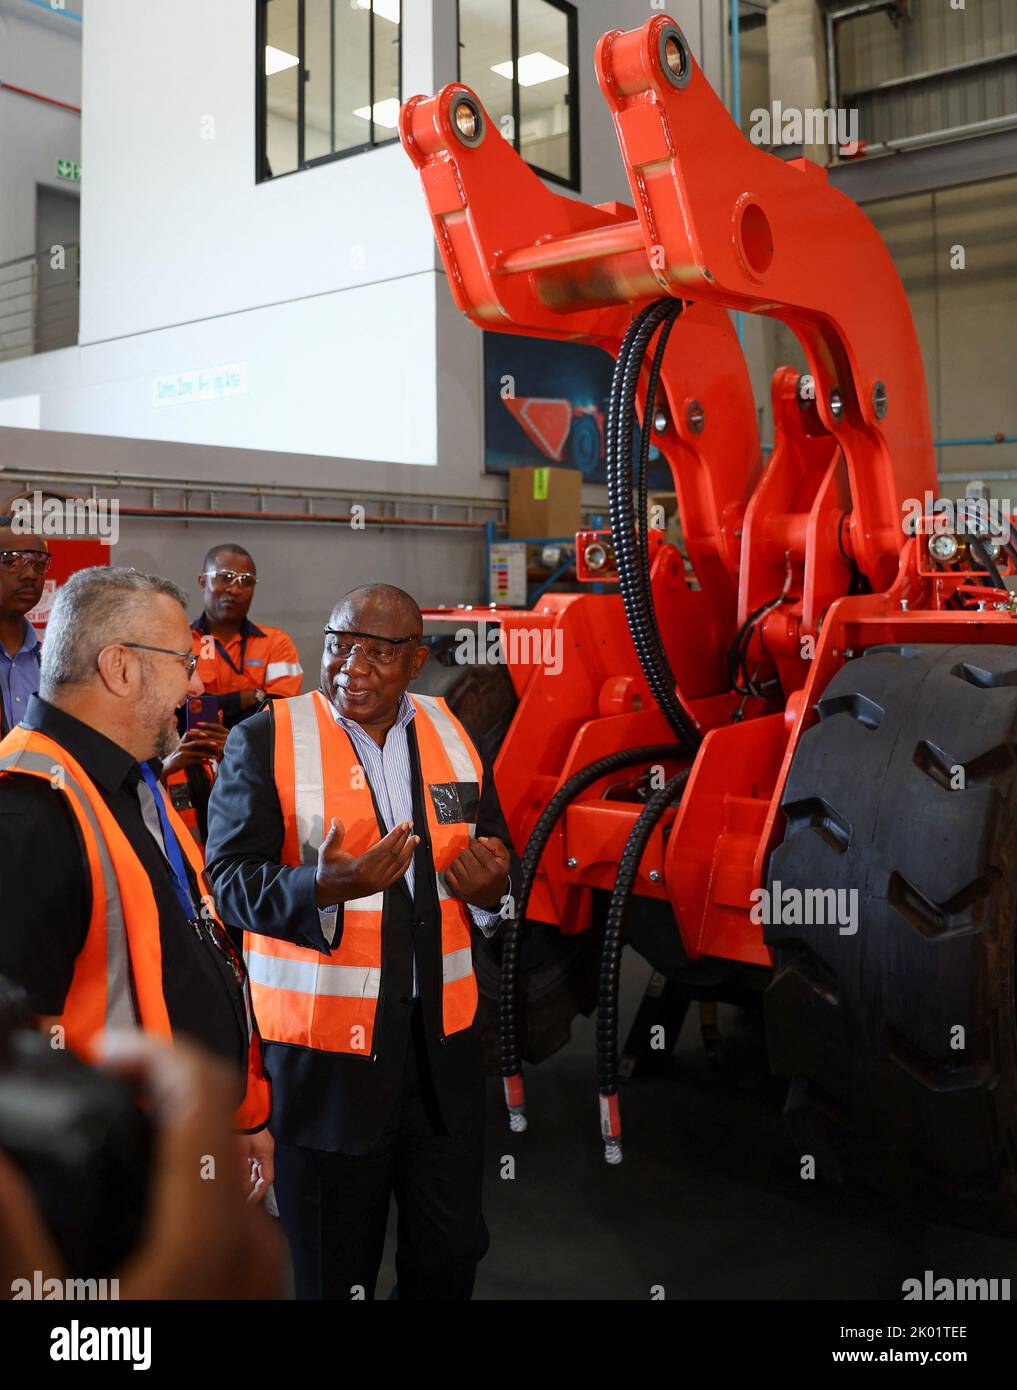 South Africa's President Cyril Ramaphosa chats in front of a mining truck during the launch of the new Sandvik Khomanani manufacturing site, at Khomanani, in Kempton Park, Johannesburg, South Africa September 9, 2022. REUTERS/Siphiwe Sibeko Stock Photo